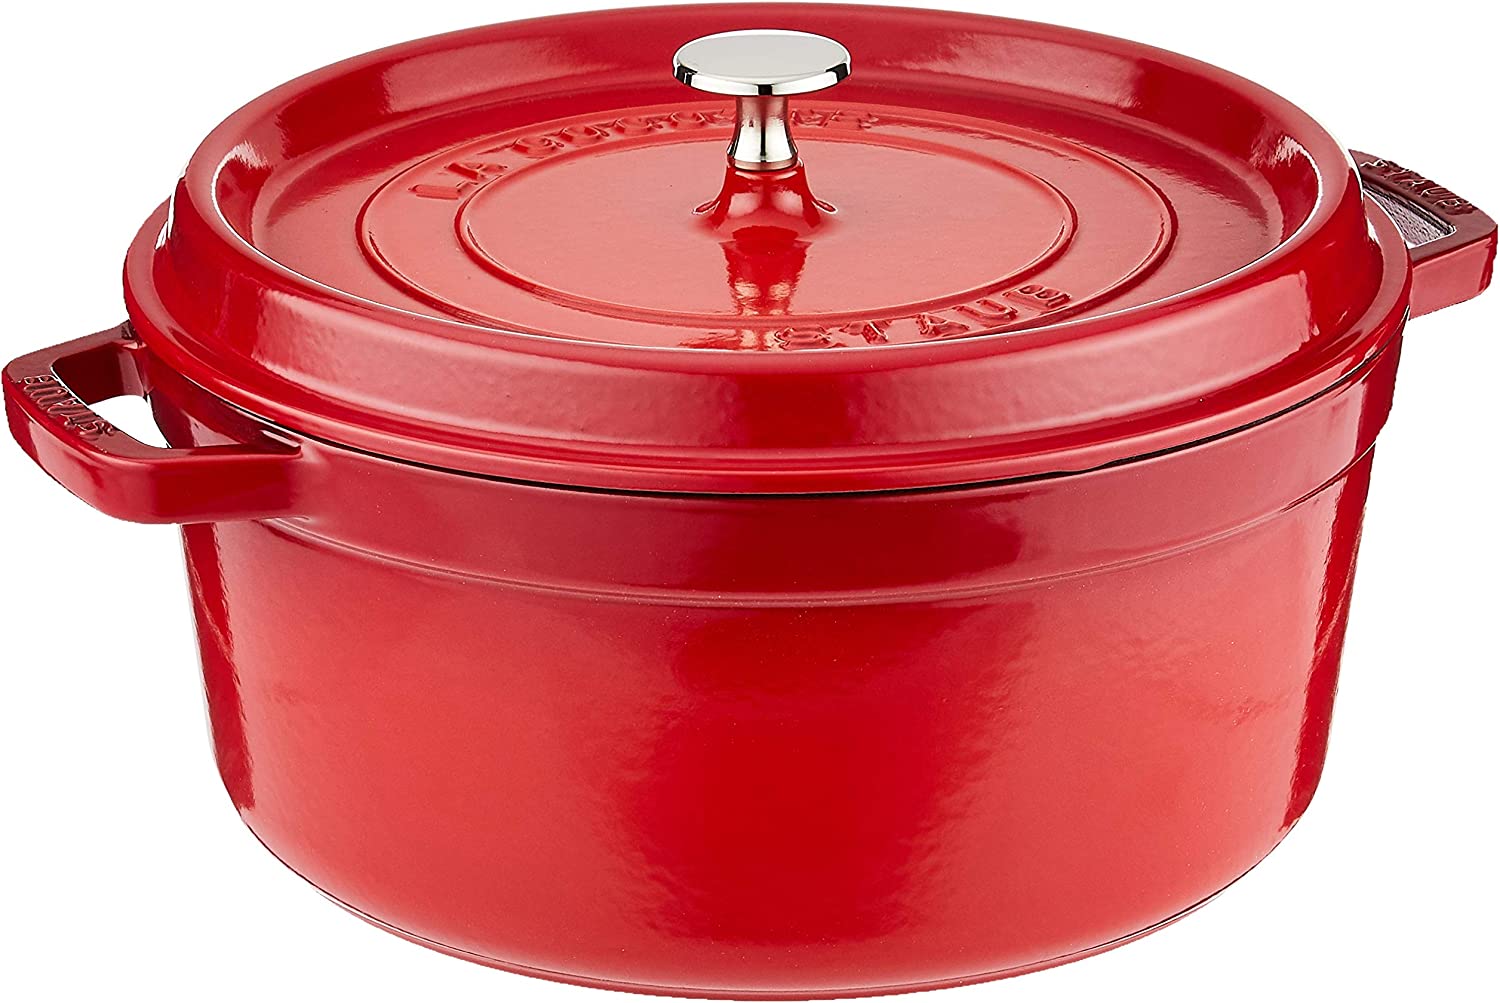 Staub Enameled cast iron cookware made in france